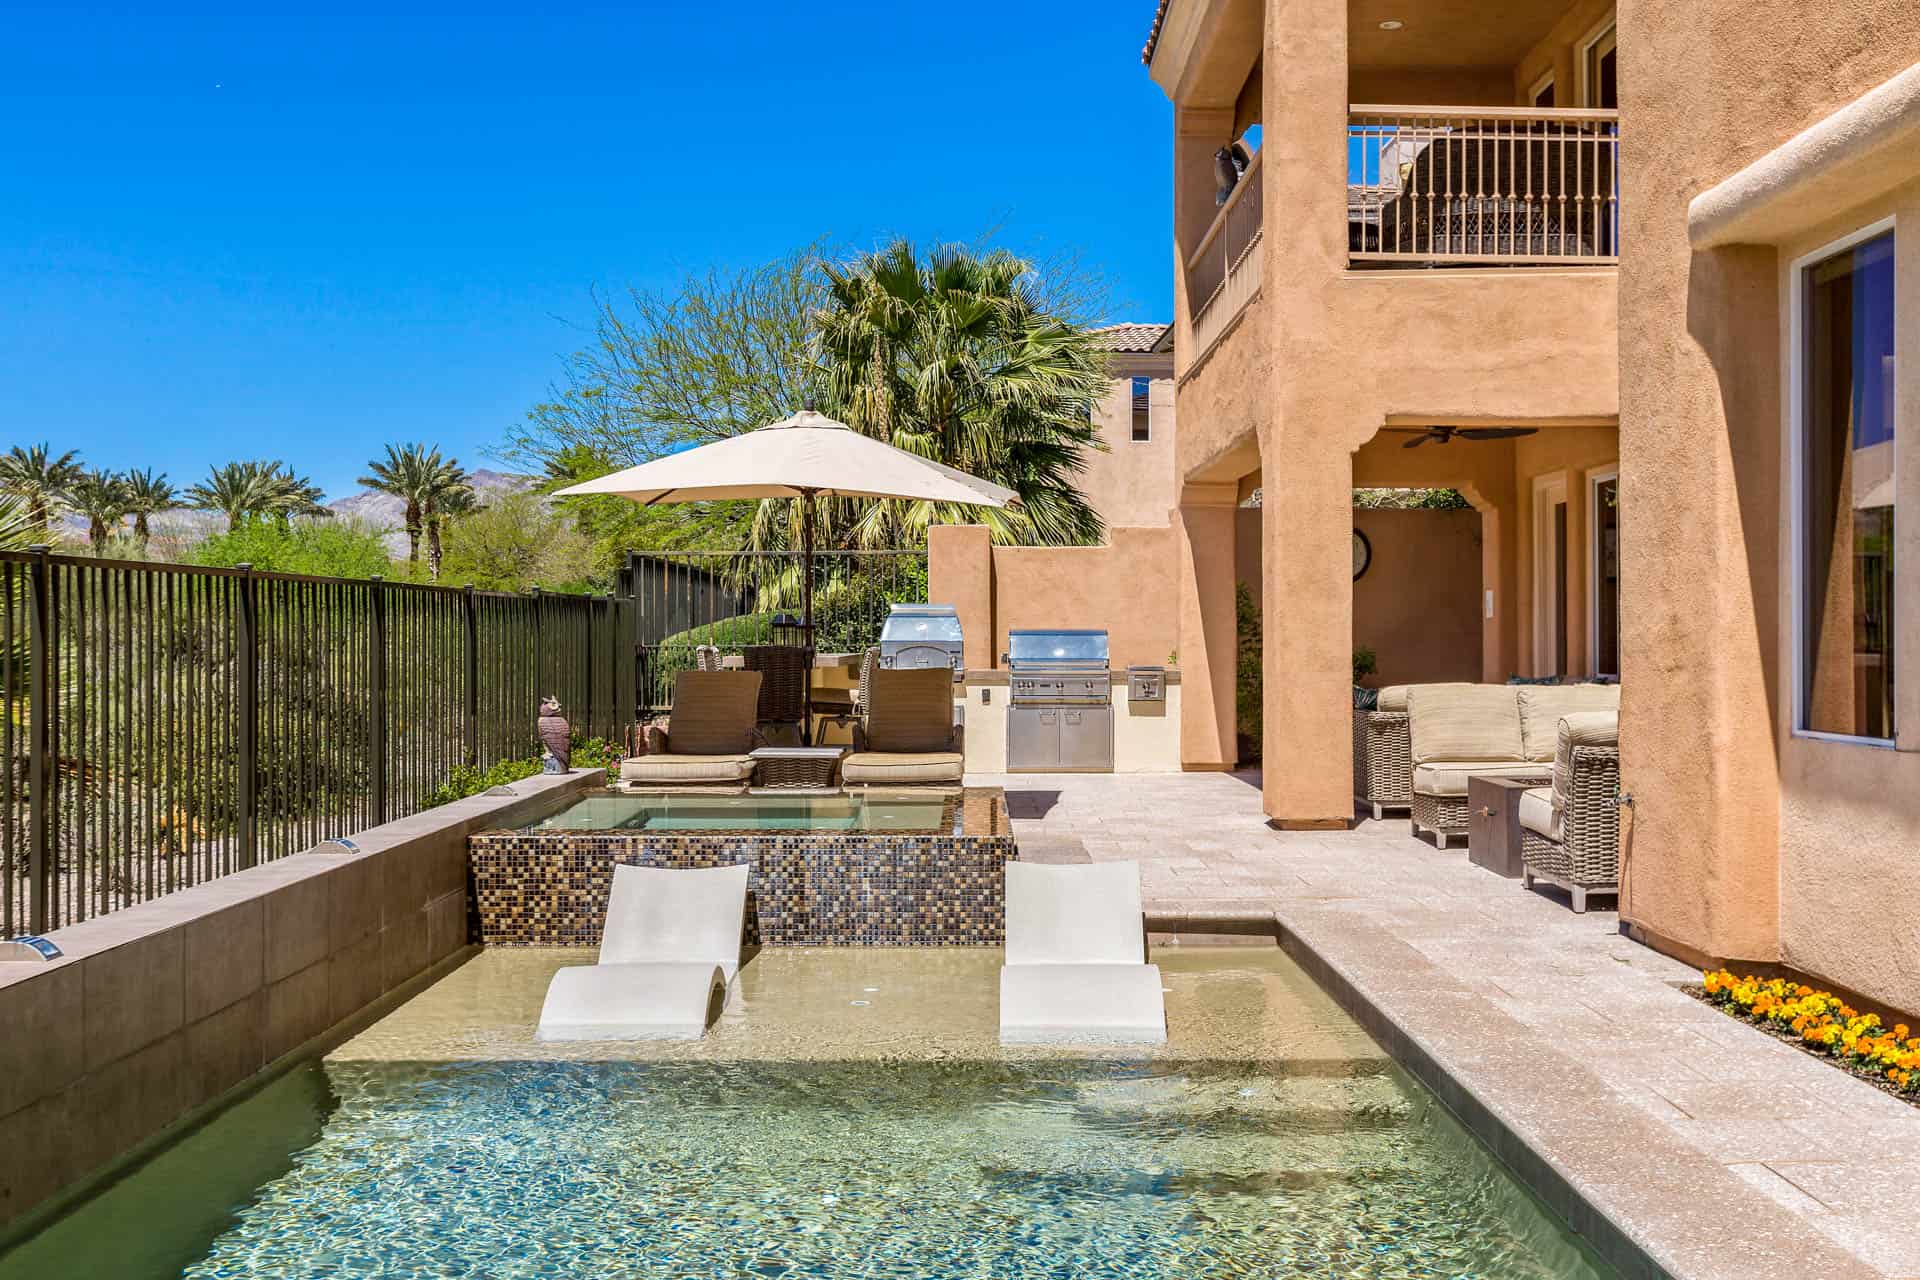 las-vegas-luxry-real-estate-realtor-rob-jensen-company-2615-grassy-spring-place-red-rock-country-club56